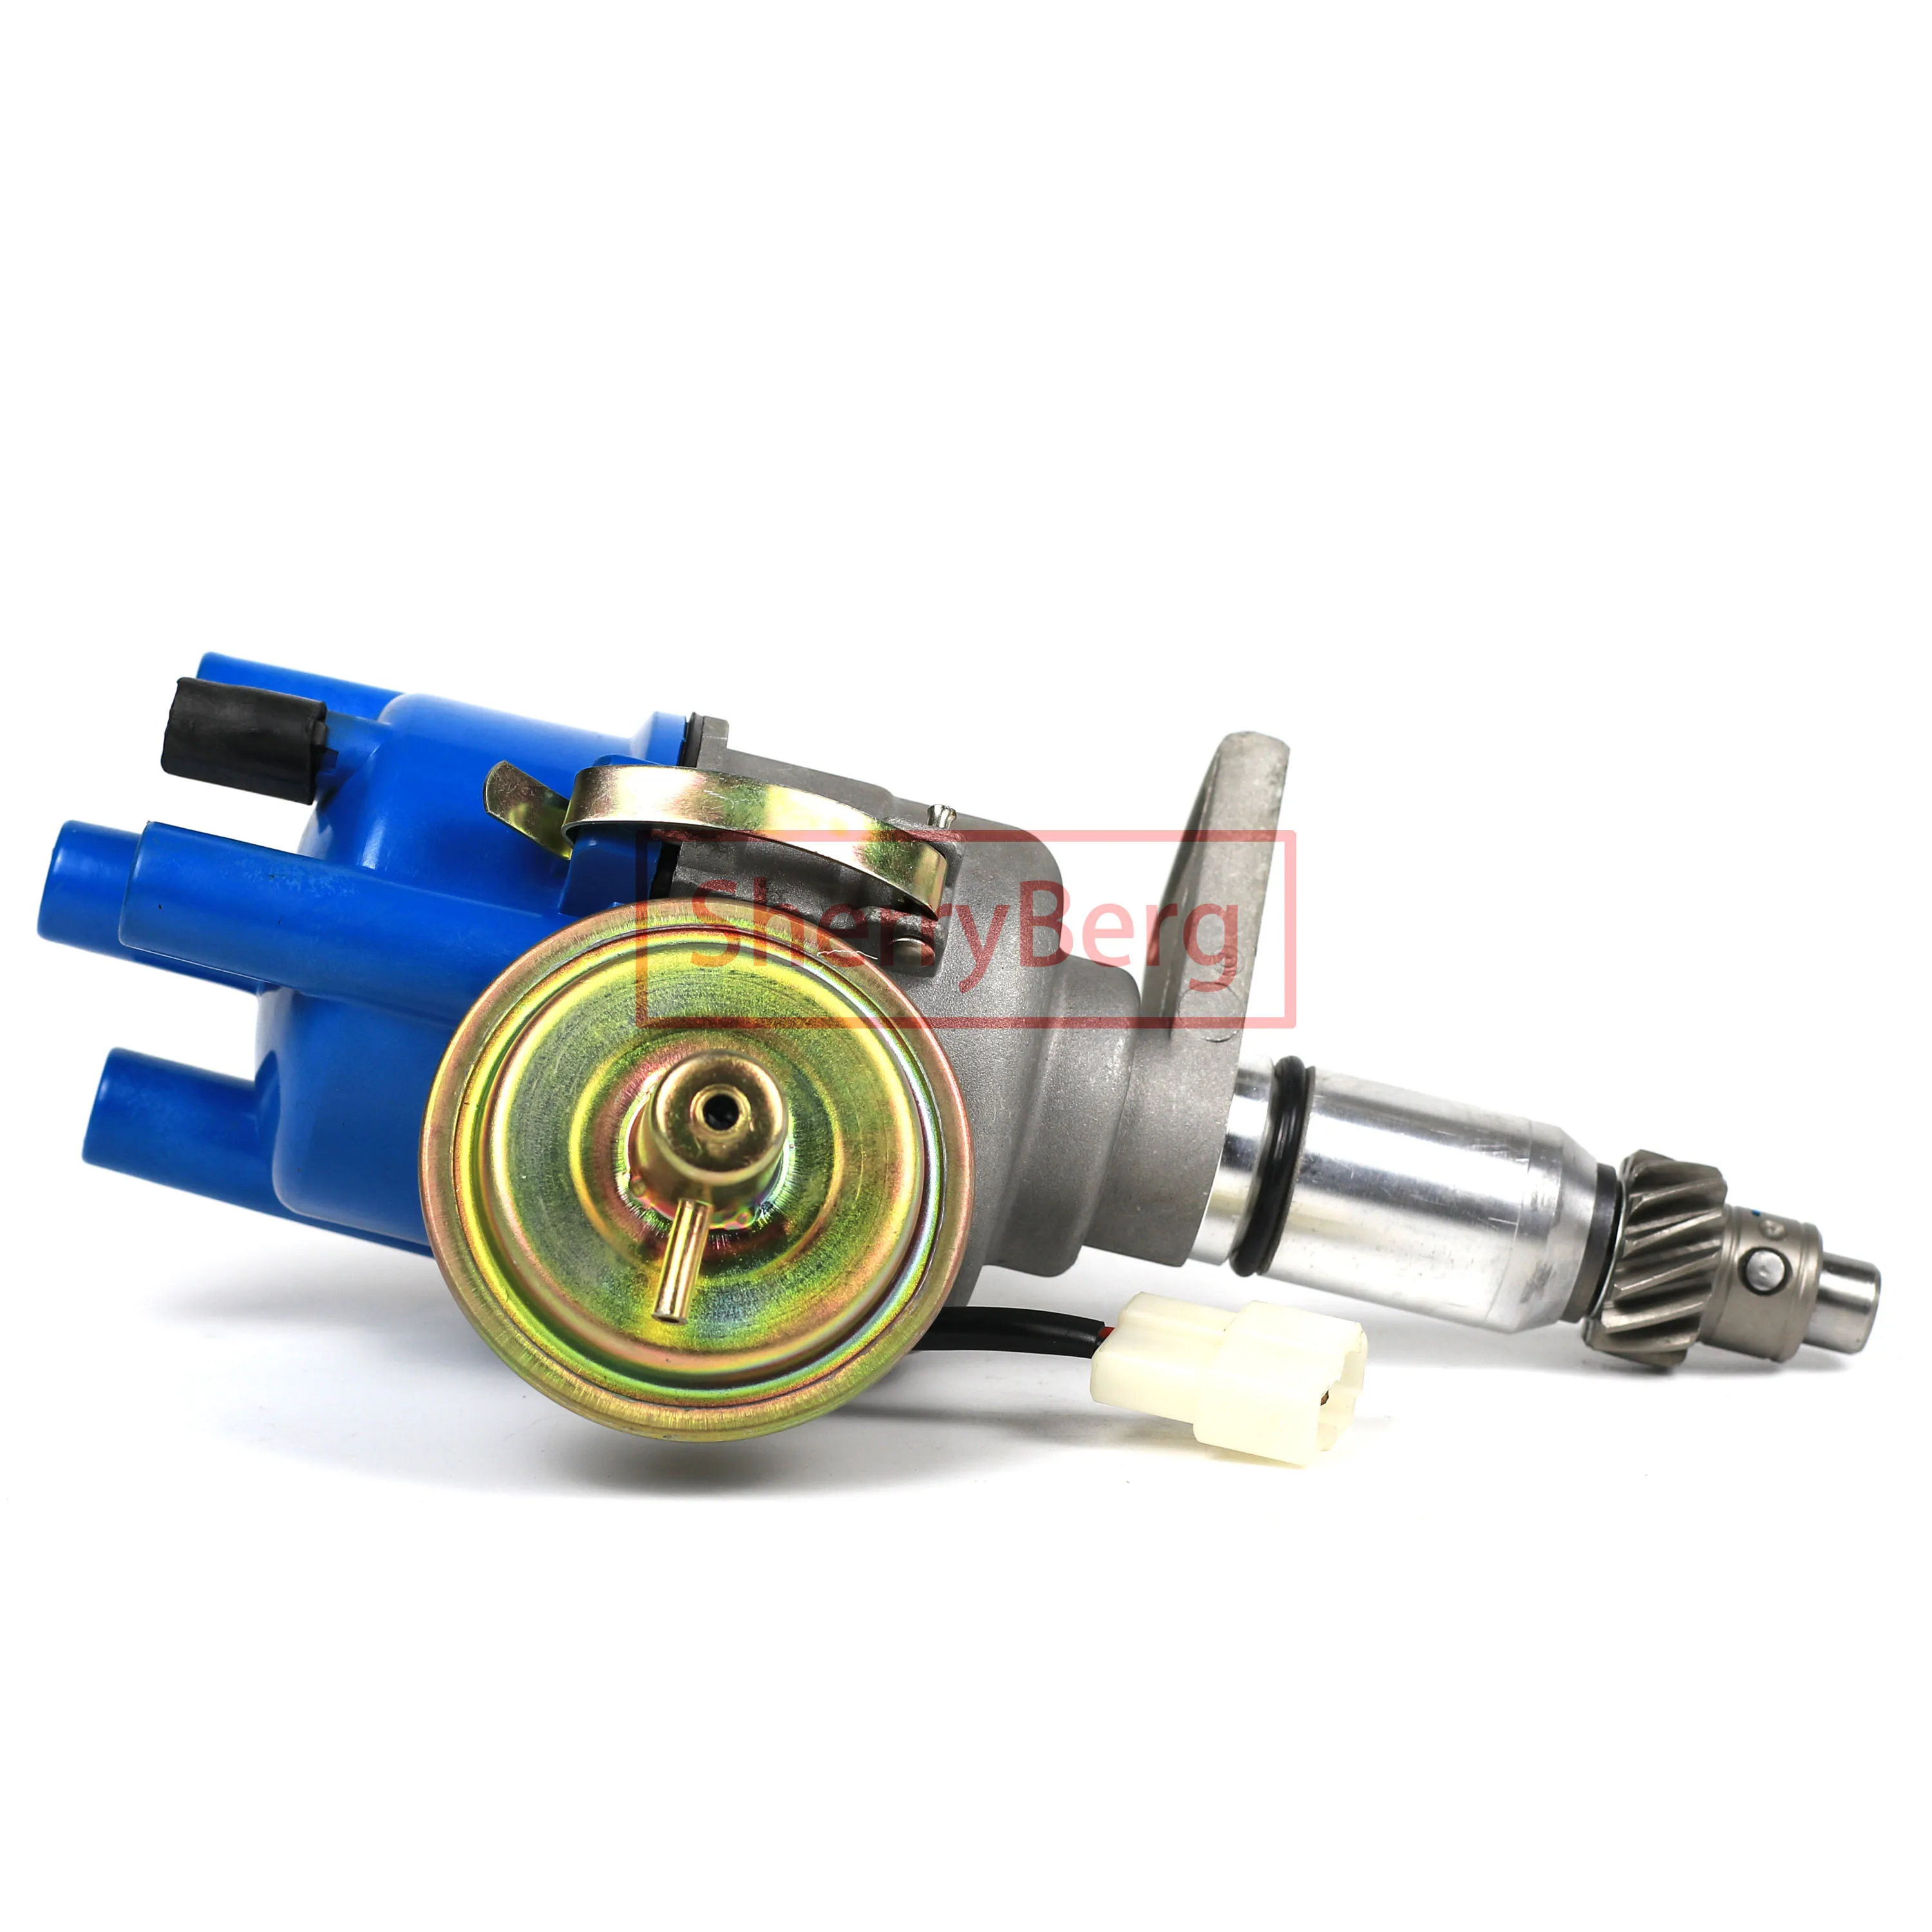 

SherryBerg IGNITION DISTRIBUTOR With vacuum Fits FOR Suzuki Alto Denso Bj.88 II 0.8 29kW 33100-78410 ND 029100-7270 FDW368Q2